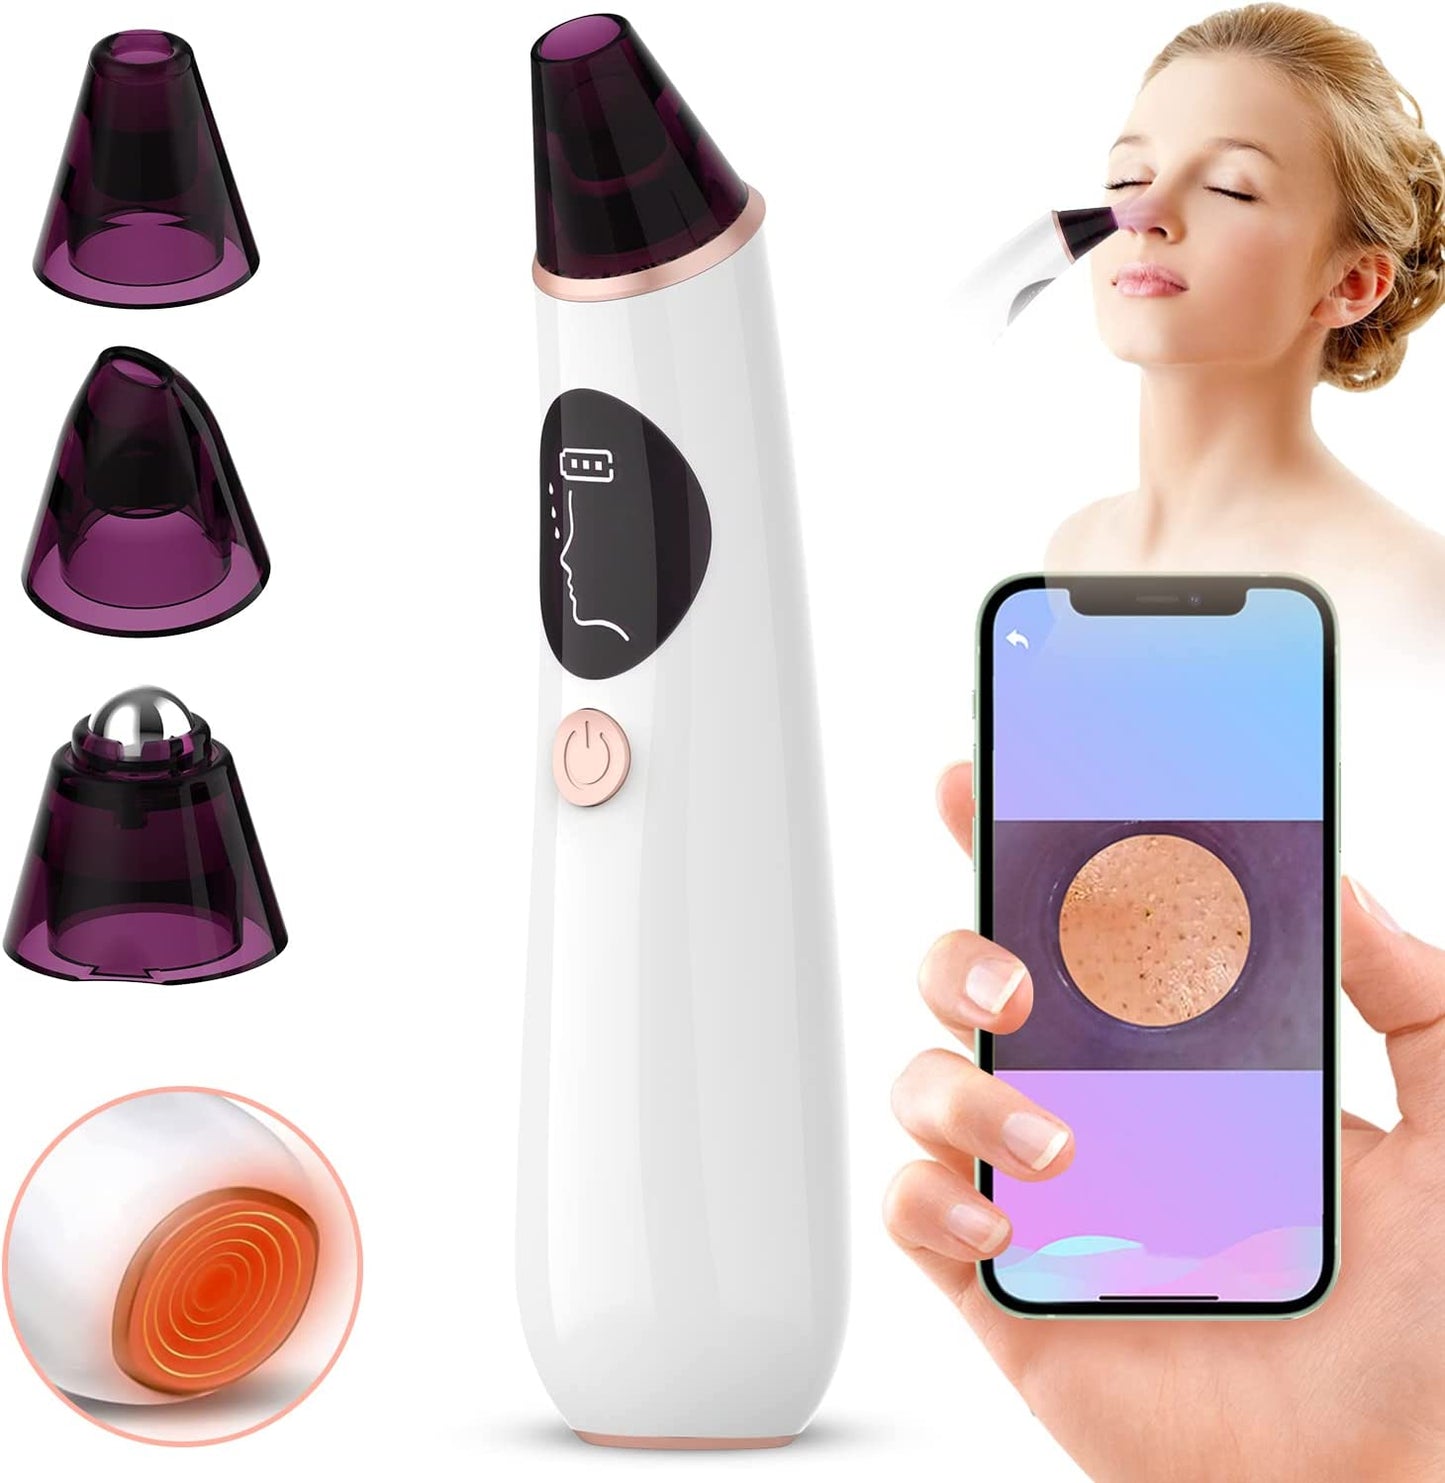 New Blackhead Remover Pore Vacuum Cleaner, Electric Facial Deep Cleaner with Camera,Pimple Vacuum Extractor Tool,USB Rechargeable Pore Sucker with LED Screen Display and 4 Suction Probes